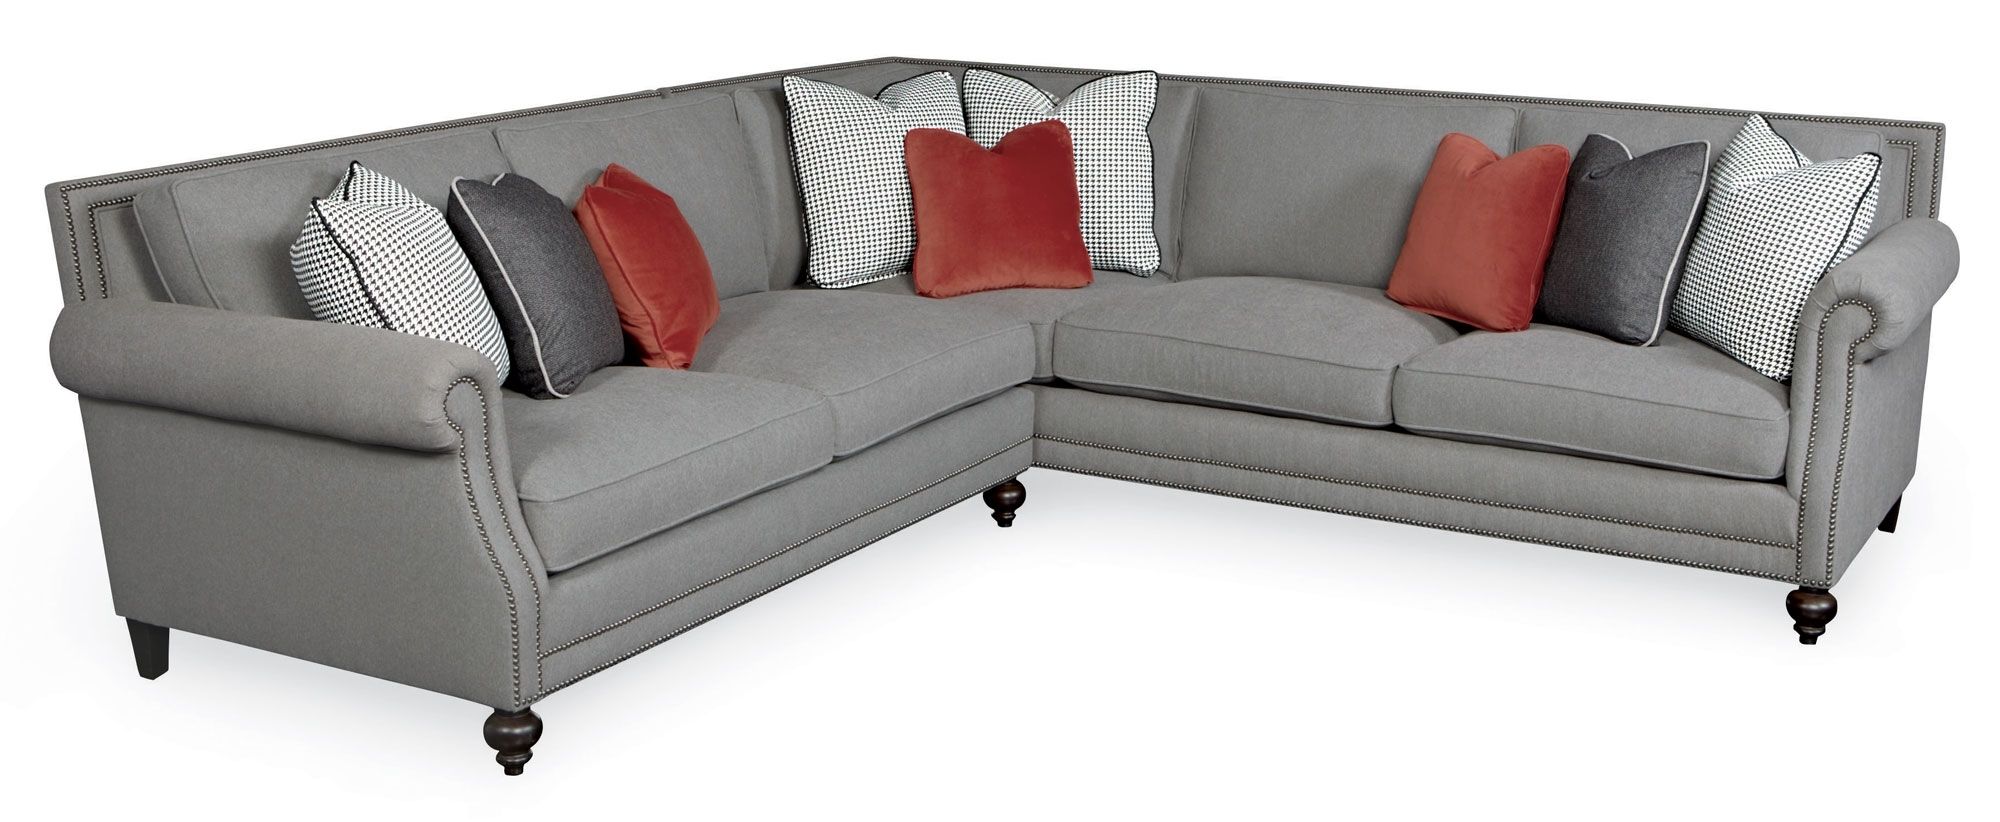 Sectional Sofa Design: Nailhead Sectional Sofa Fabric Leather Chaise Intended For Sectional Sofas With Nailhead Trim (Photo 10 of 10)